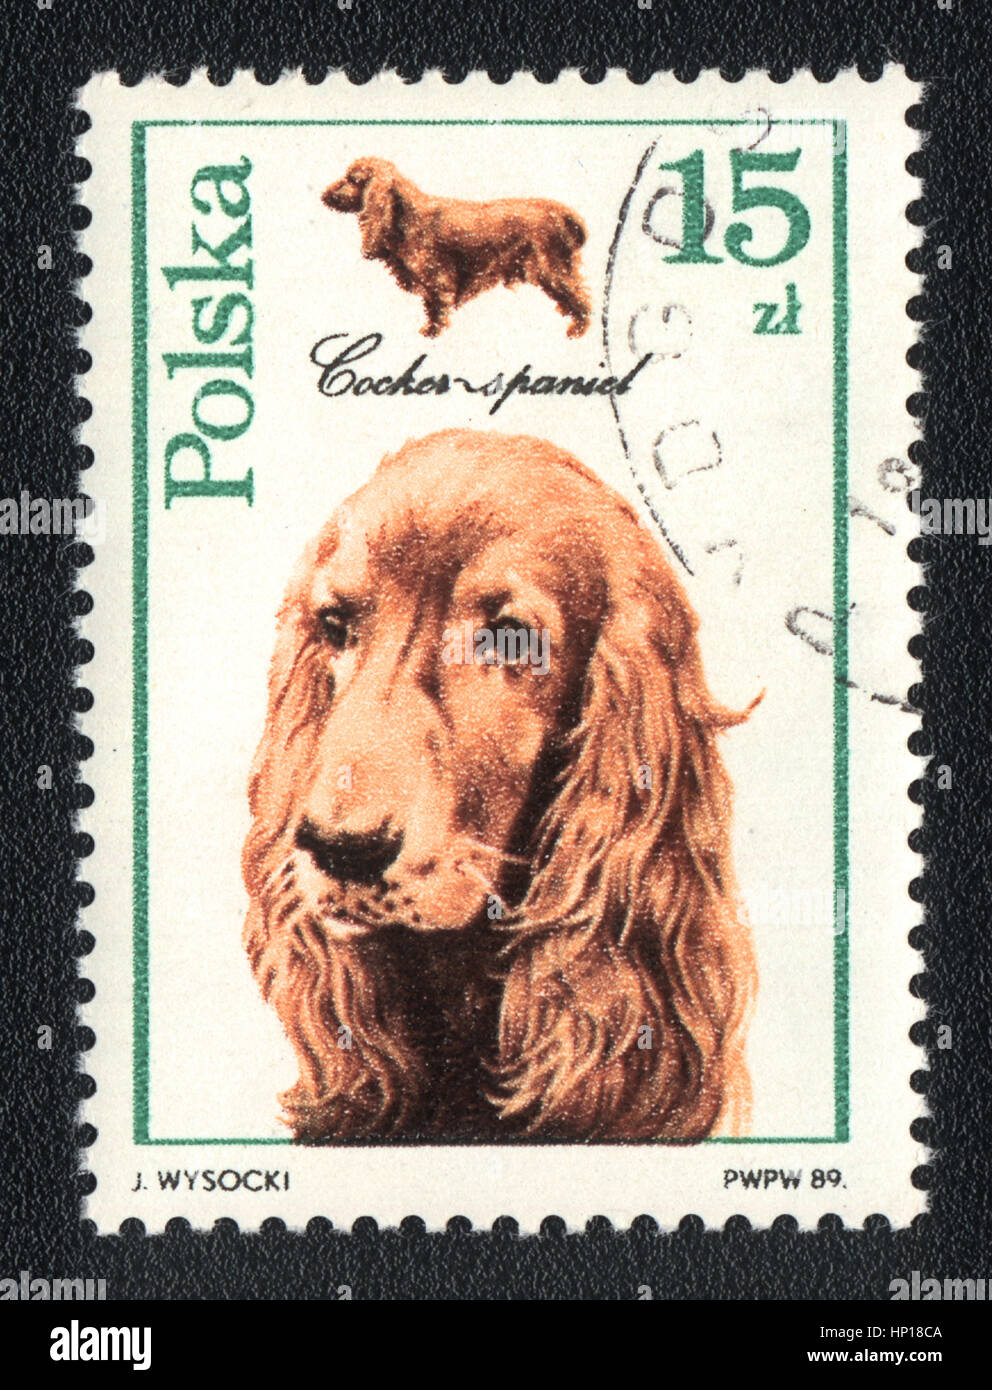 Cocker Spaniel Metal Stamp  Cavalier Dog Breed Jewelry Stamp – Stamp Yours